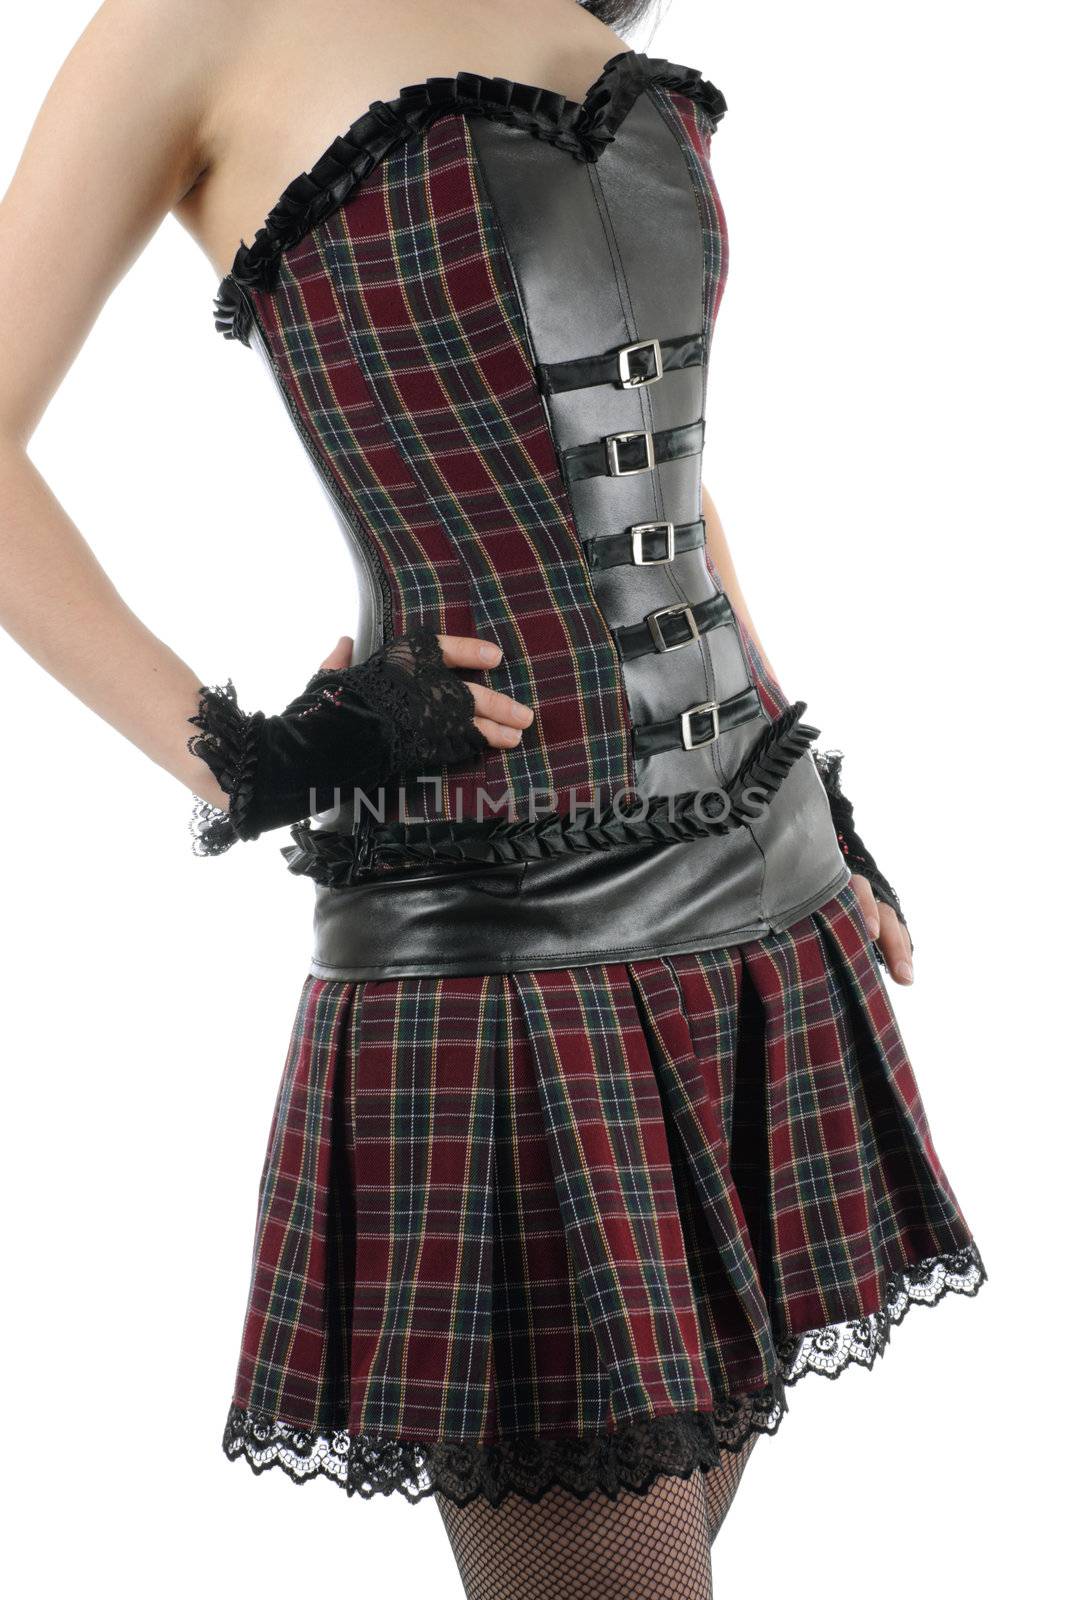 Part of young female body weared in corset and skirt. Gloves on hands and stocking on legs. Isolated on white background